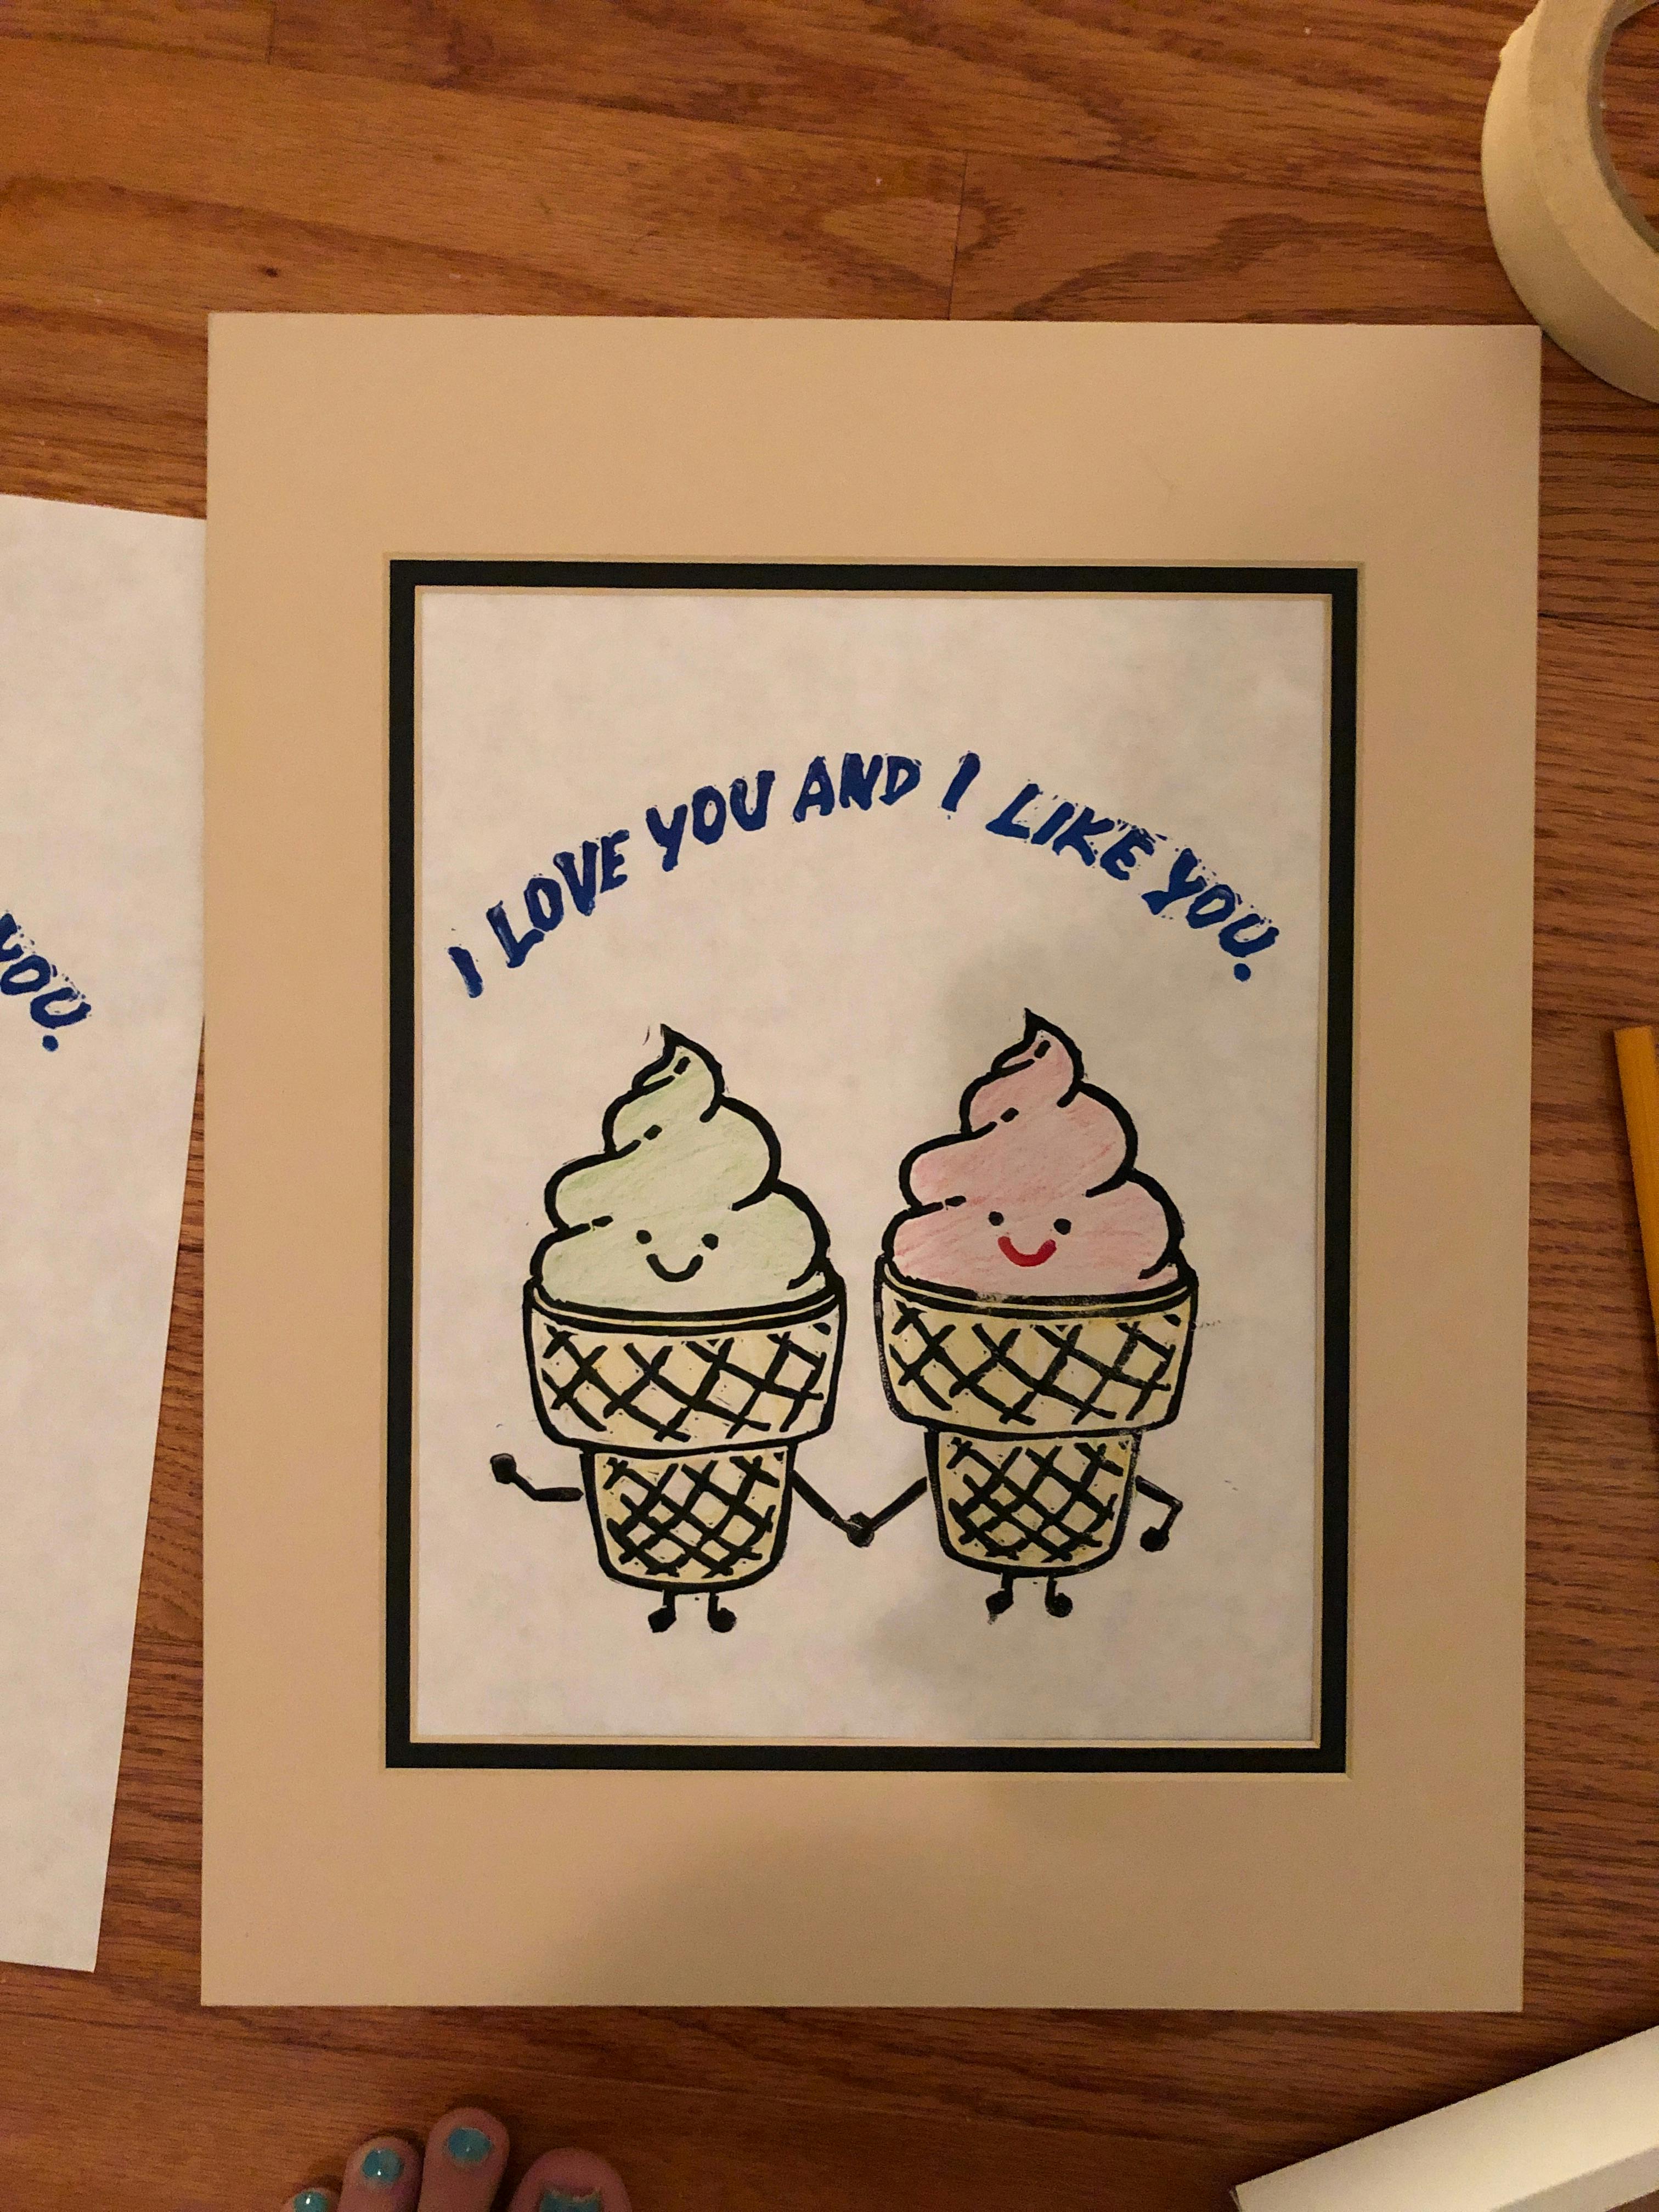 A print of two anthropomorphized ice cream cones holding hands.